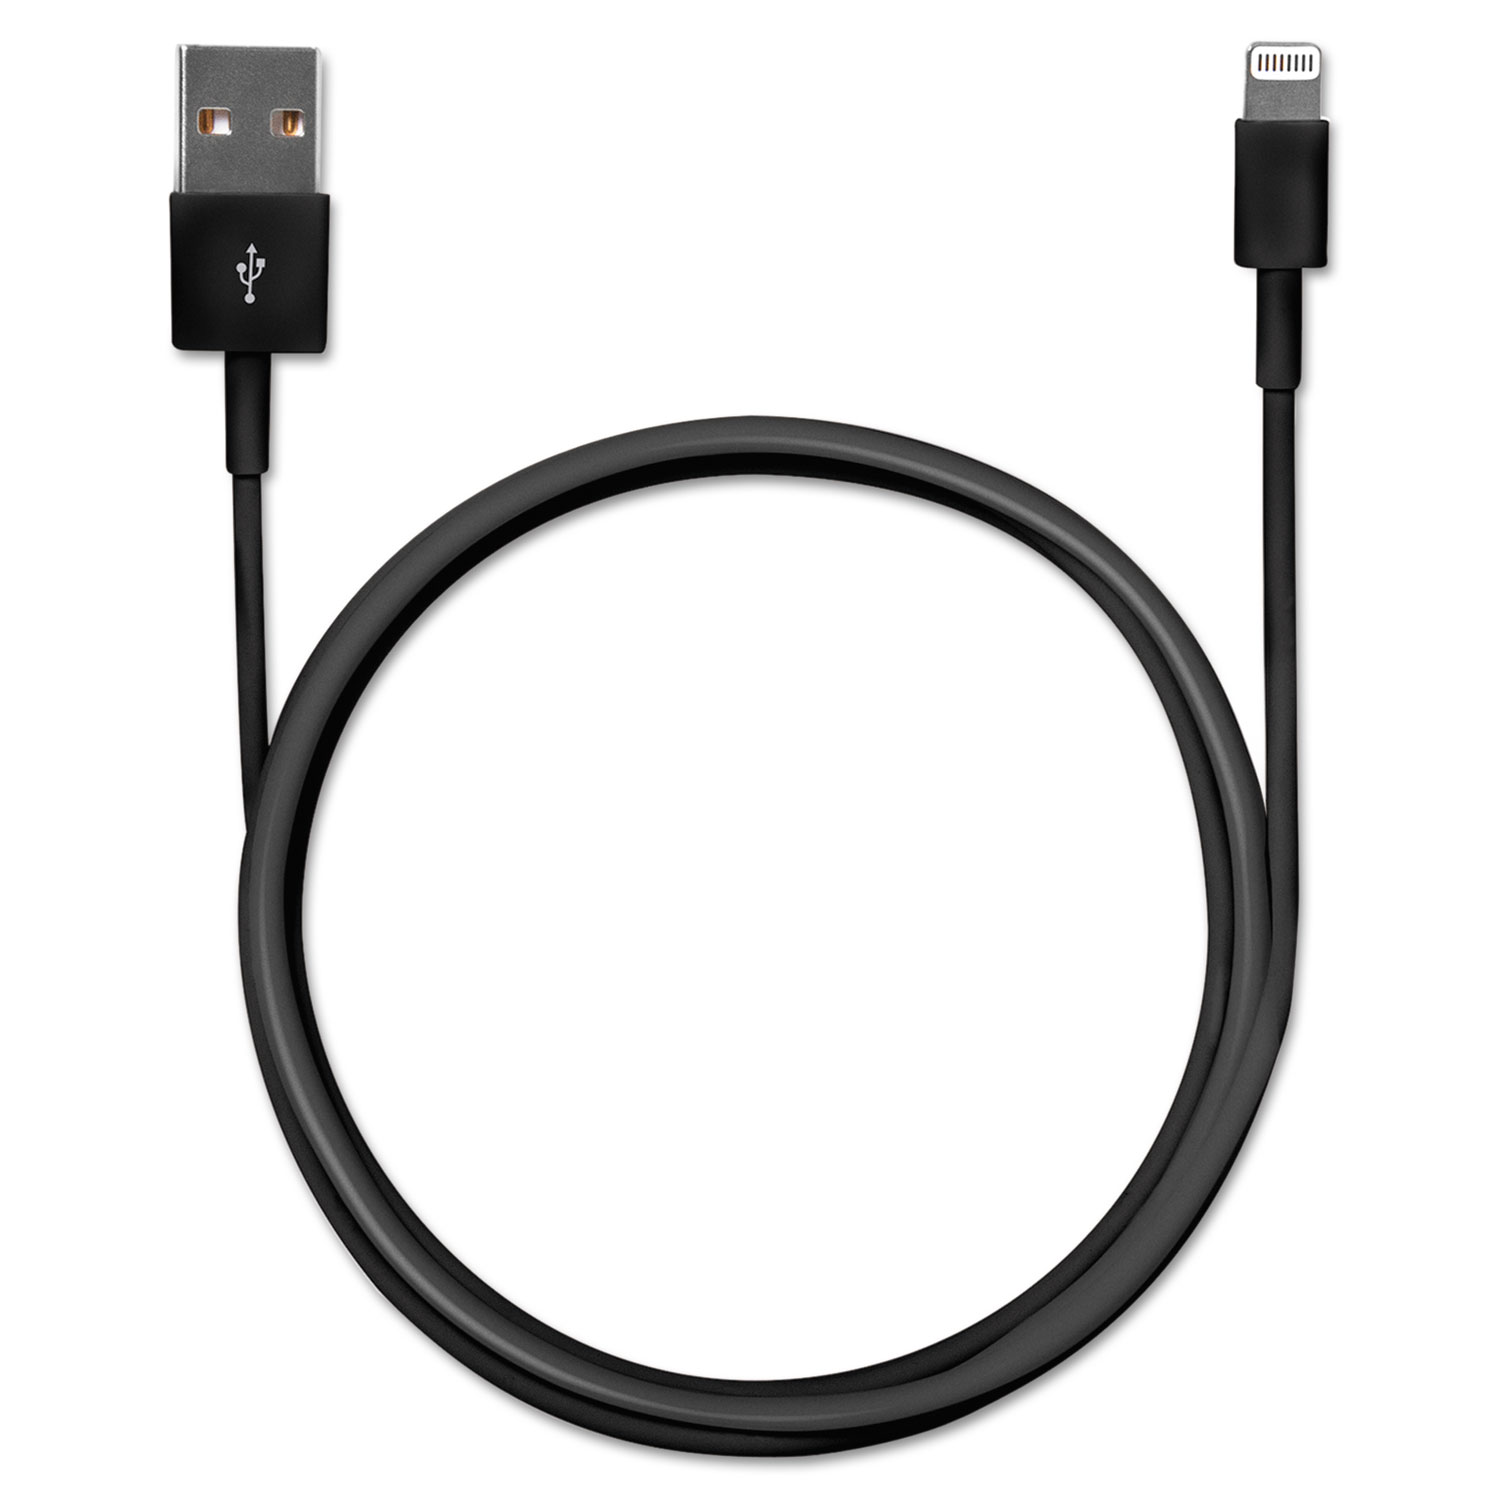  Kensington K39686AM Charge/Sync Cable, Lightning 8Pin Connector to USB, 1 Meter (KMW39686) 